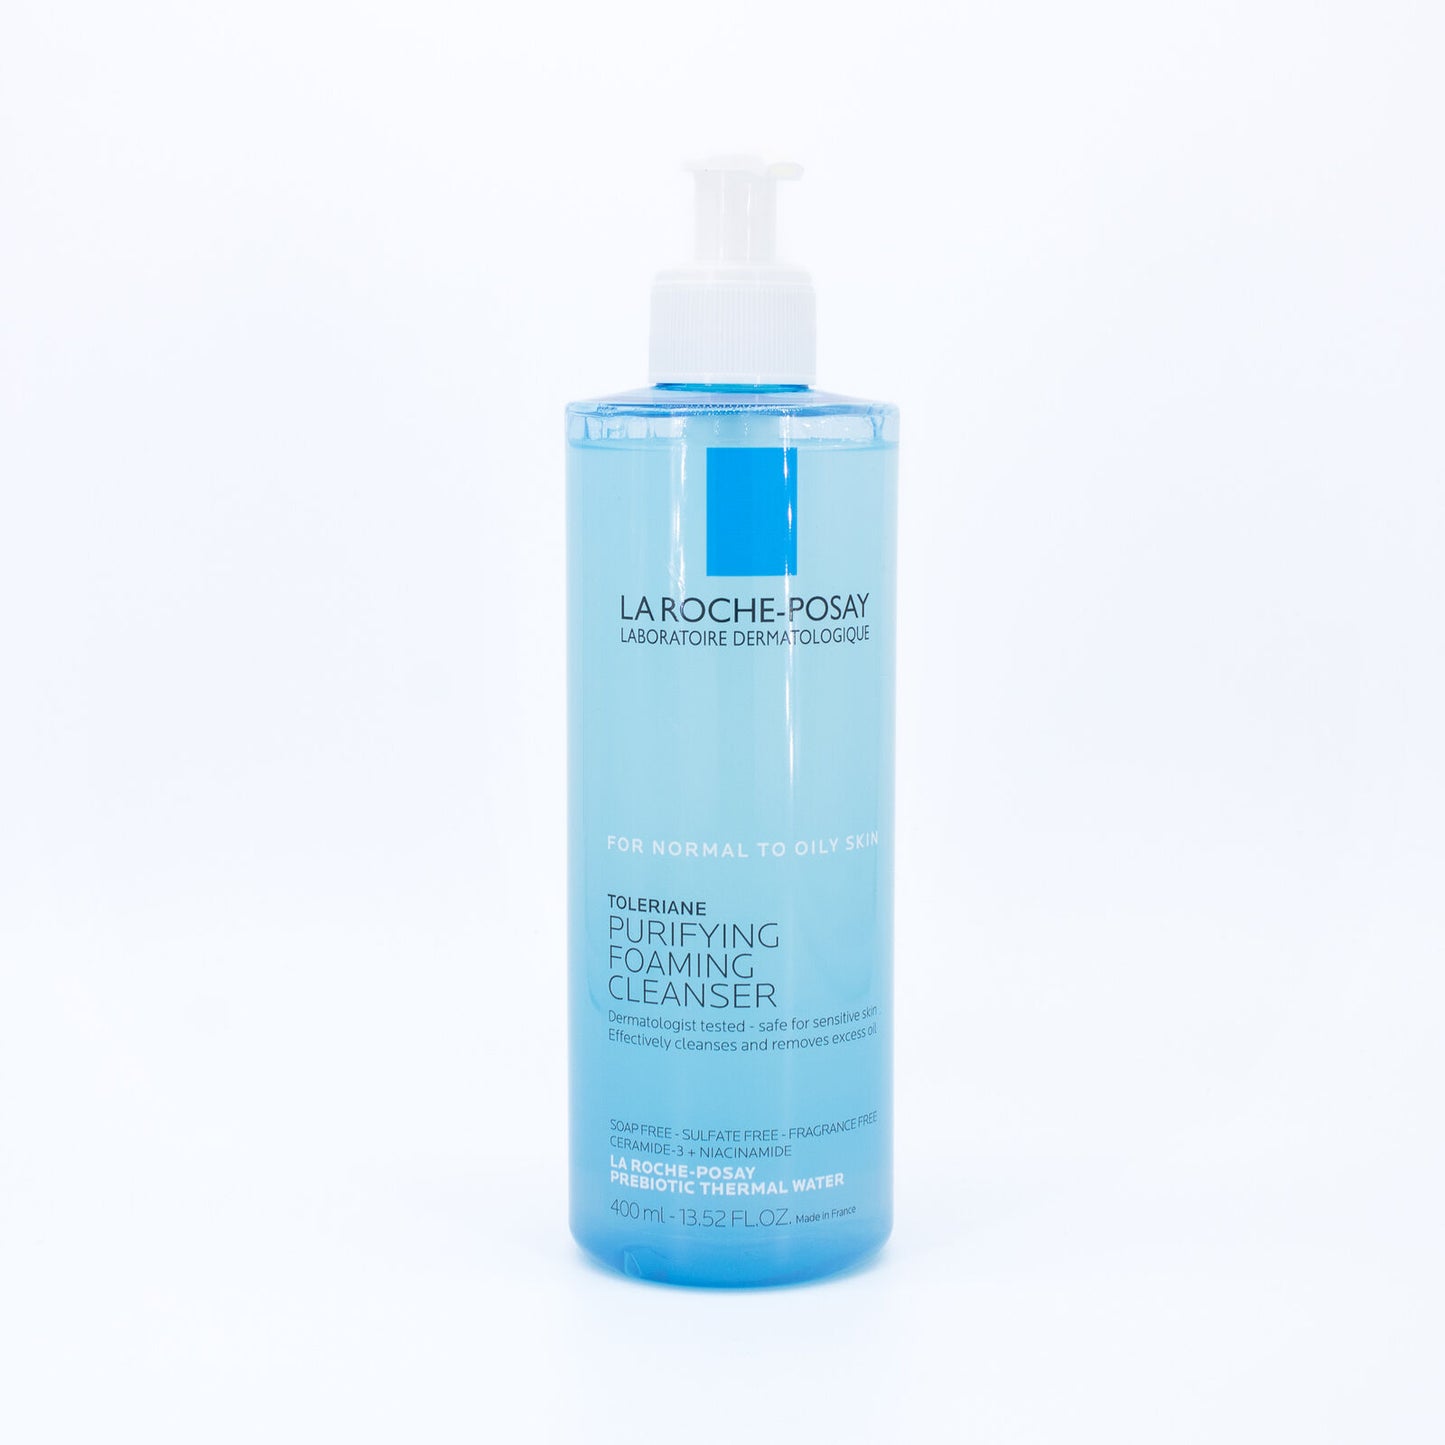 LA ROCHE-POSAY Purifying Foaming Cleanser 13.5oz - New - This is Beauty US